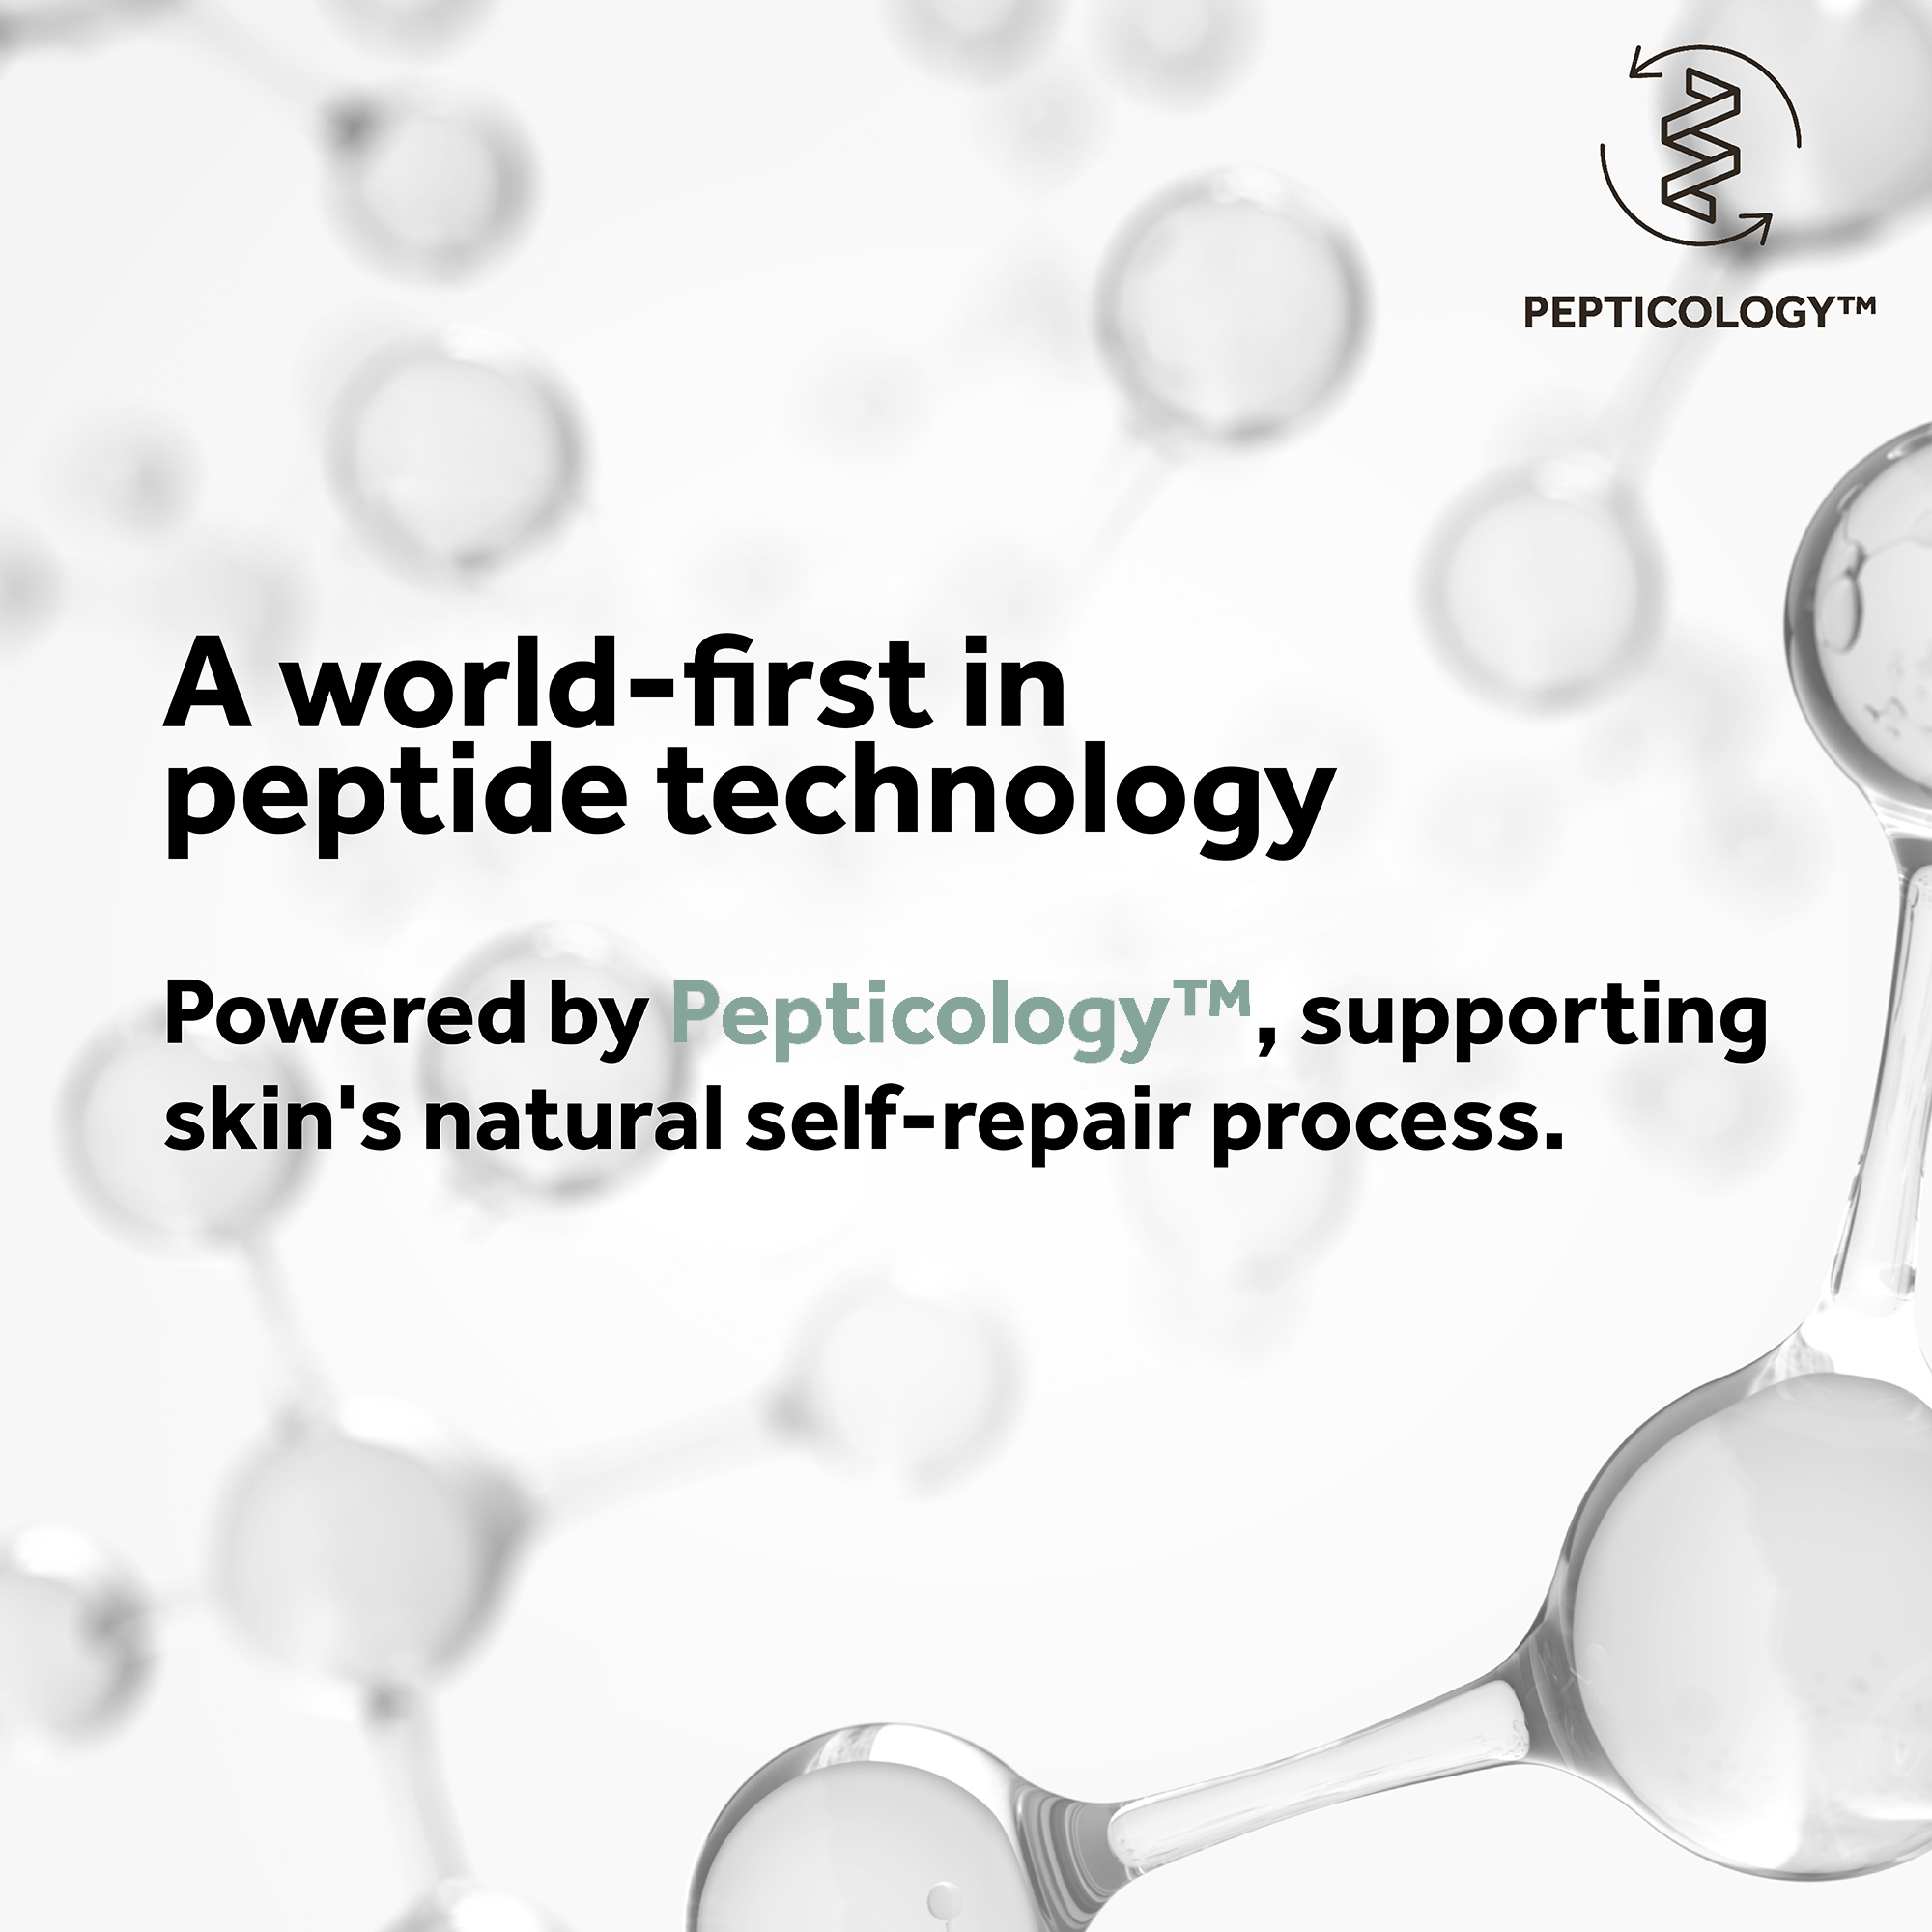 A world first in peptide technology. Powered by pepticology, supporting skin's natural self-repair process.